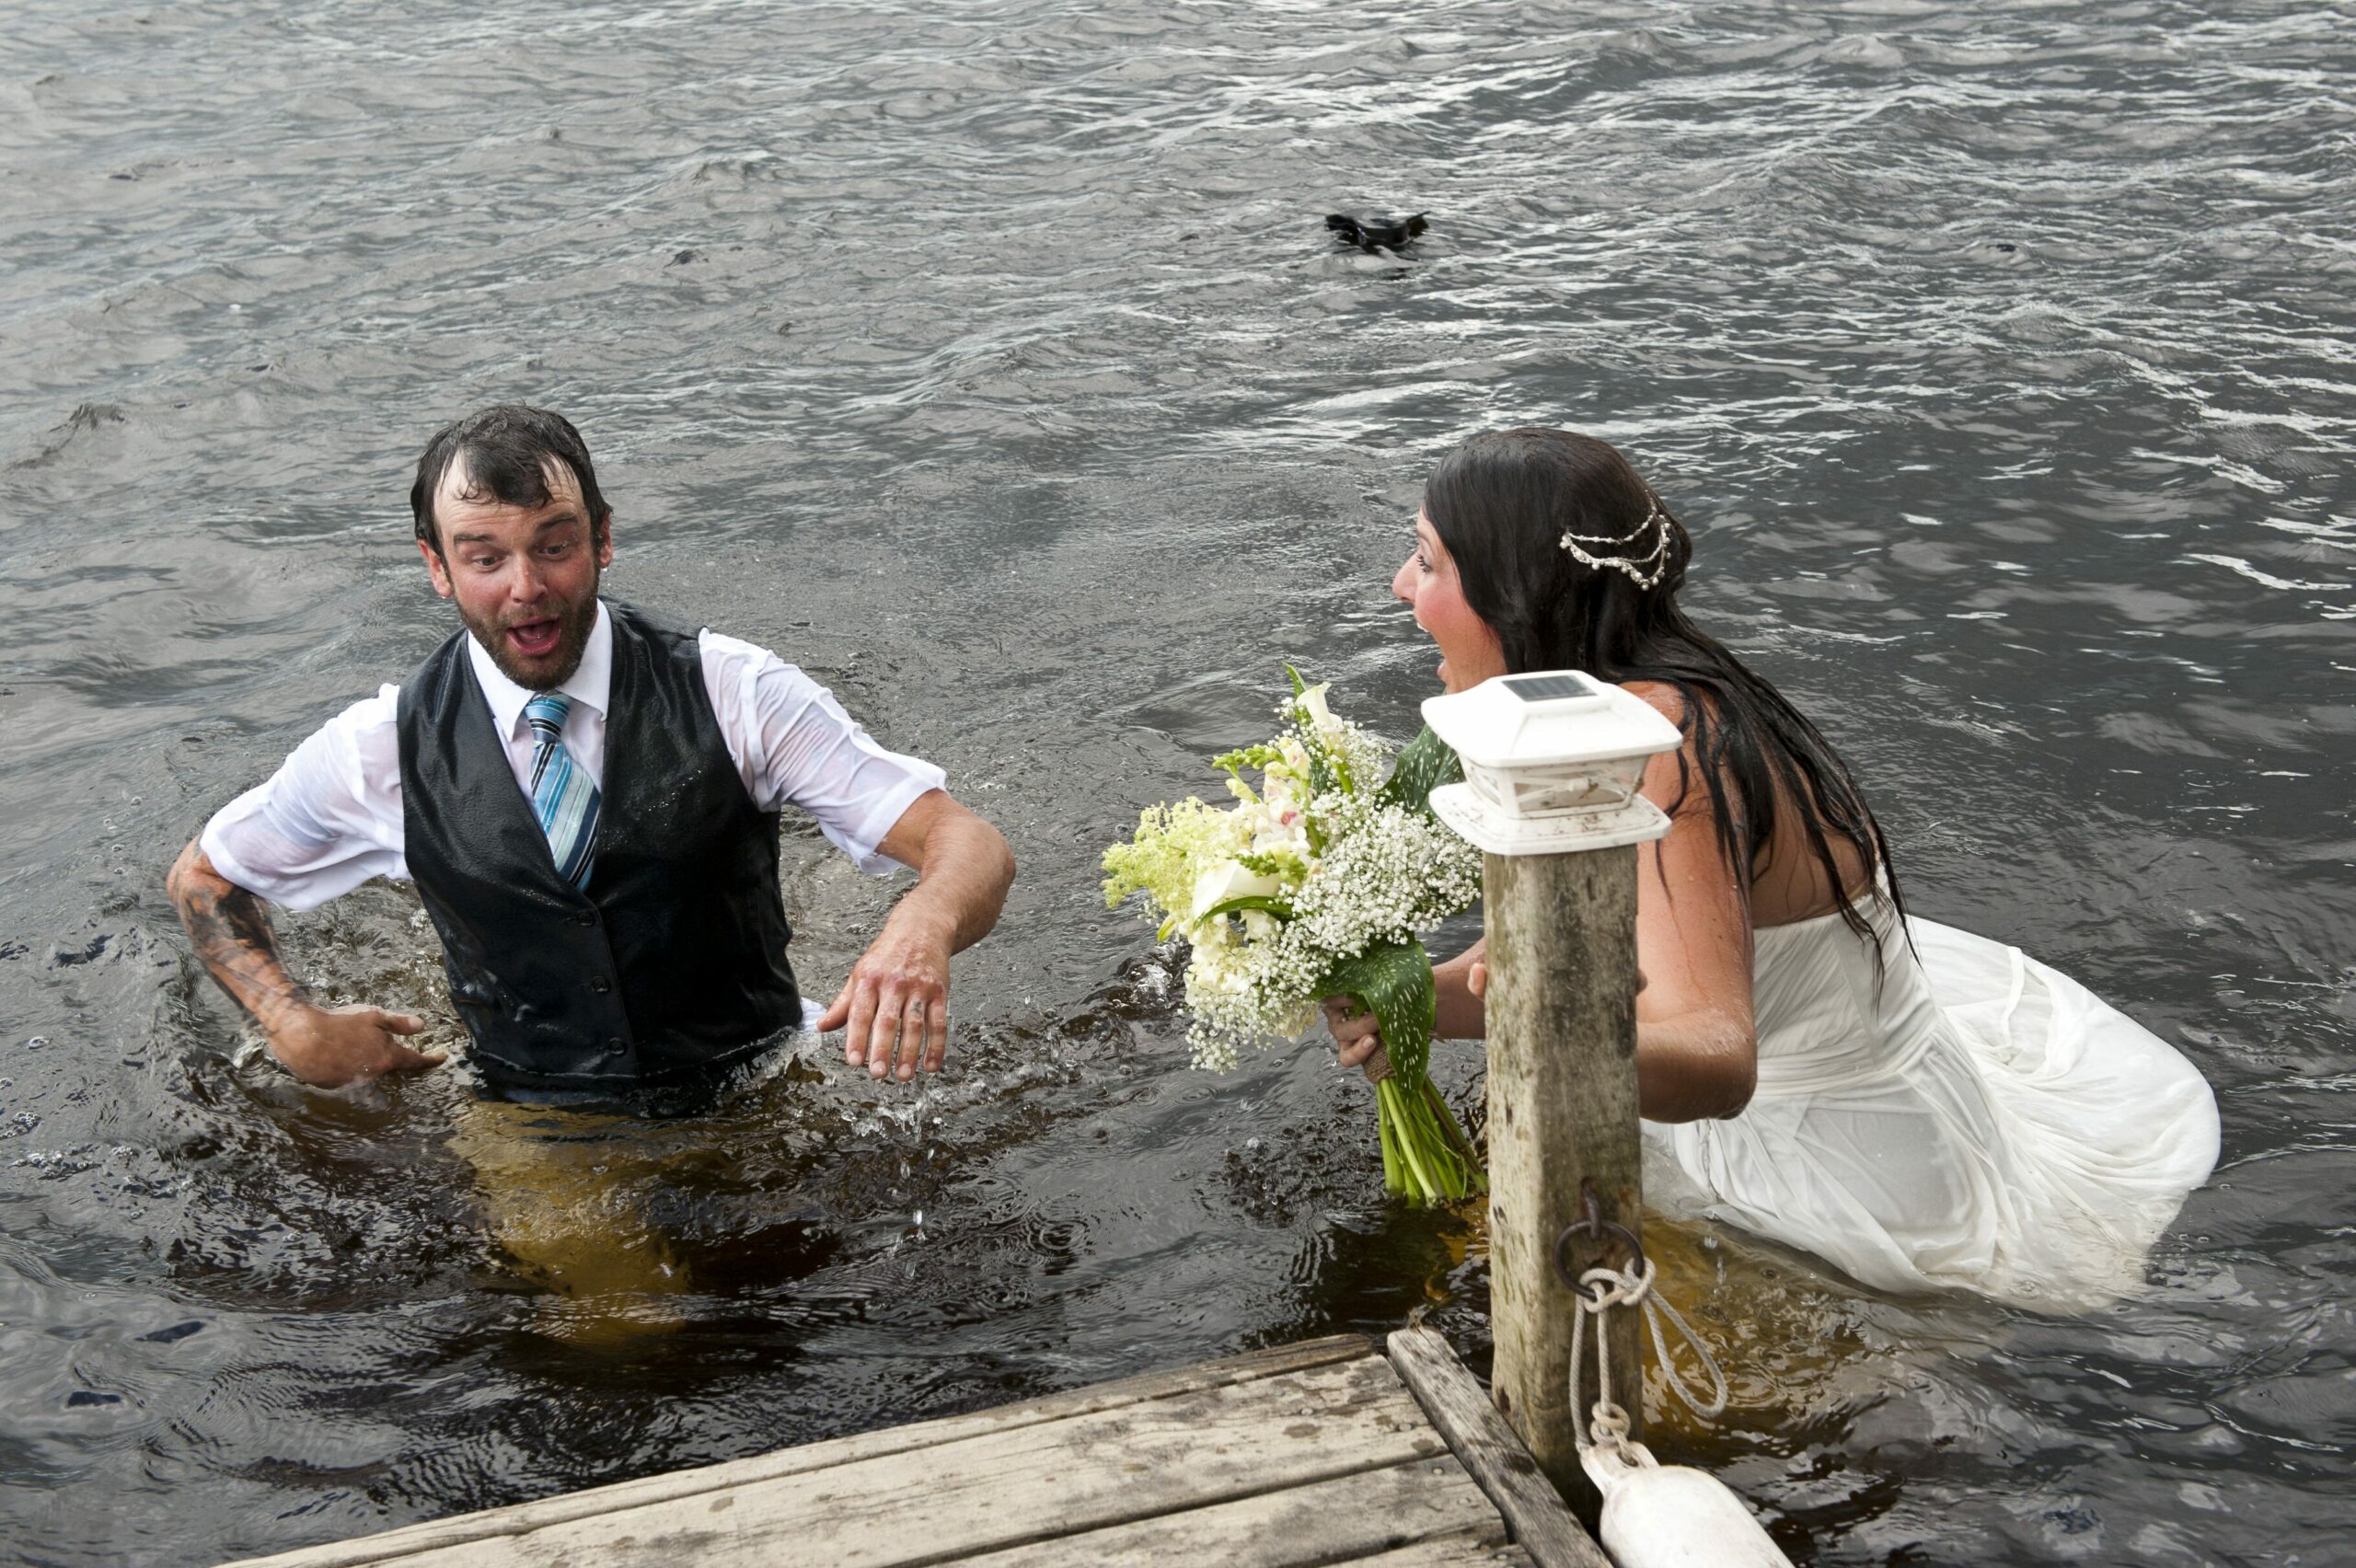 Bride, groom fall into river during wedding photos while attempting 'romantic' dance move